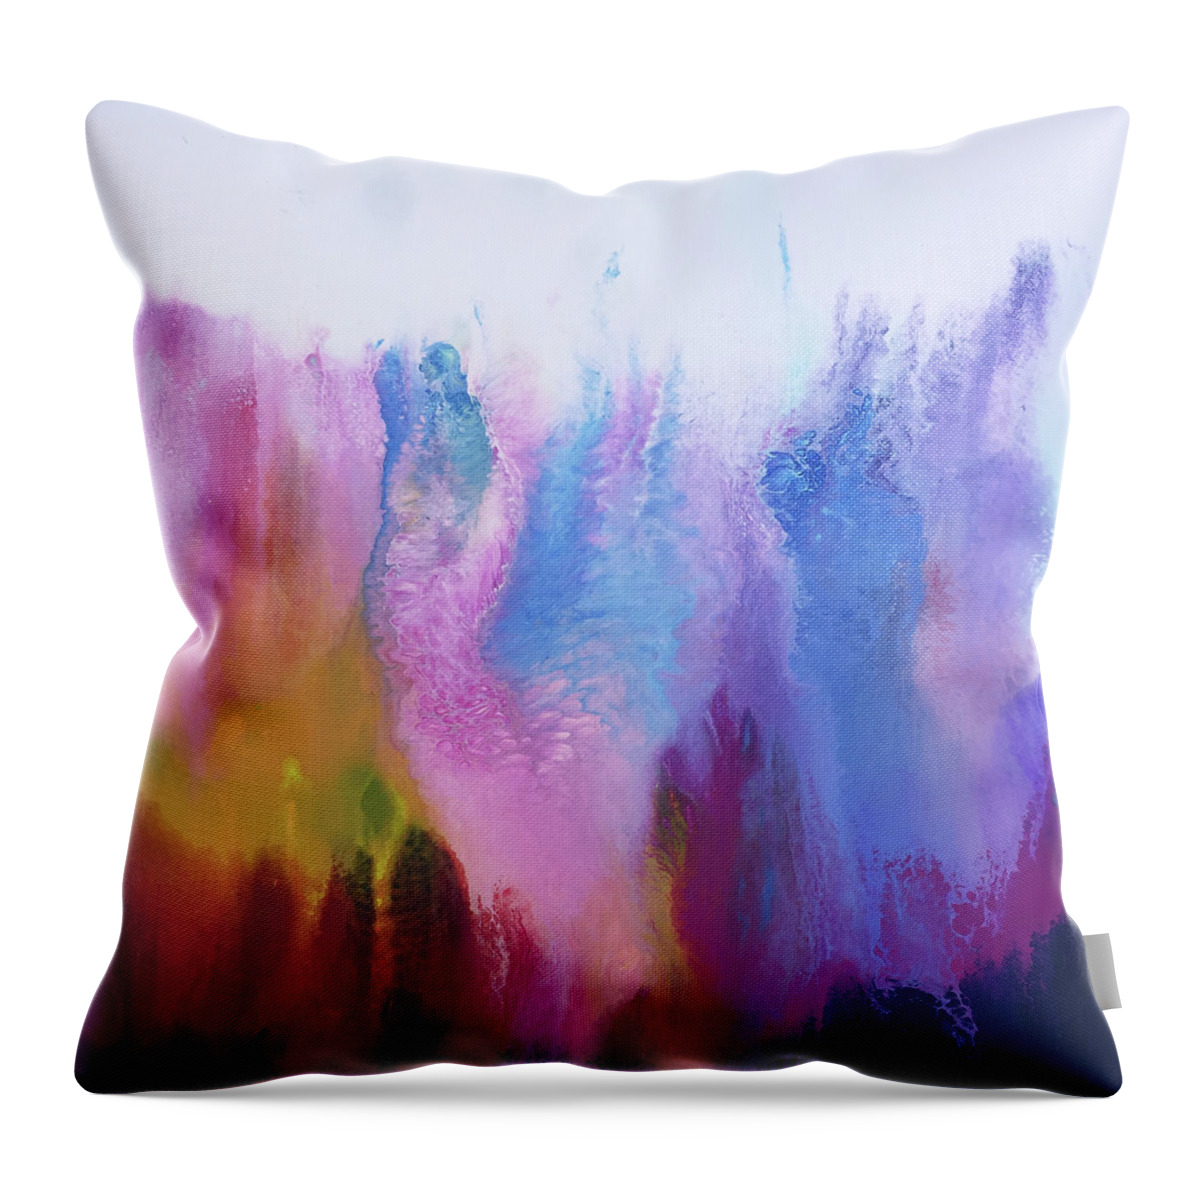 Blue Throw Pillow featuring the painting Graceful by Linda Bailey